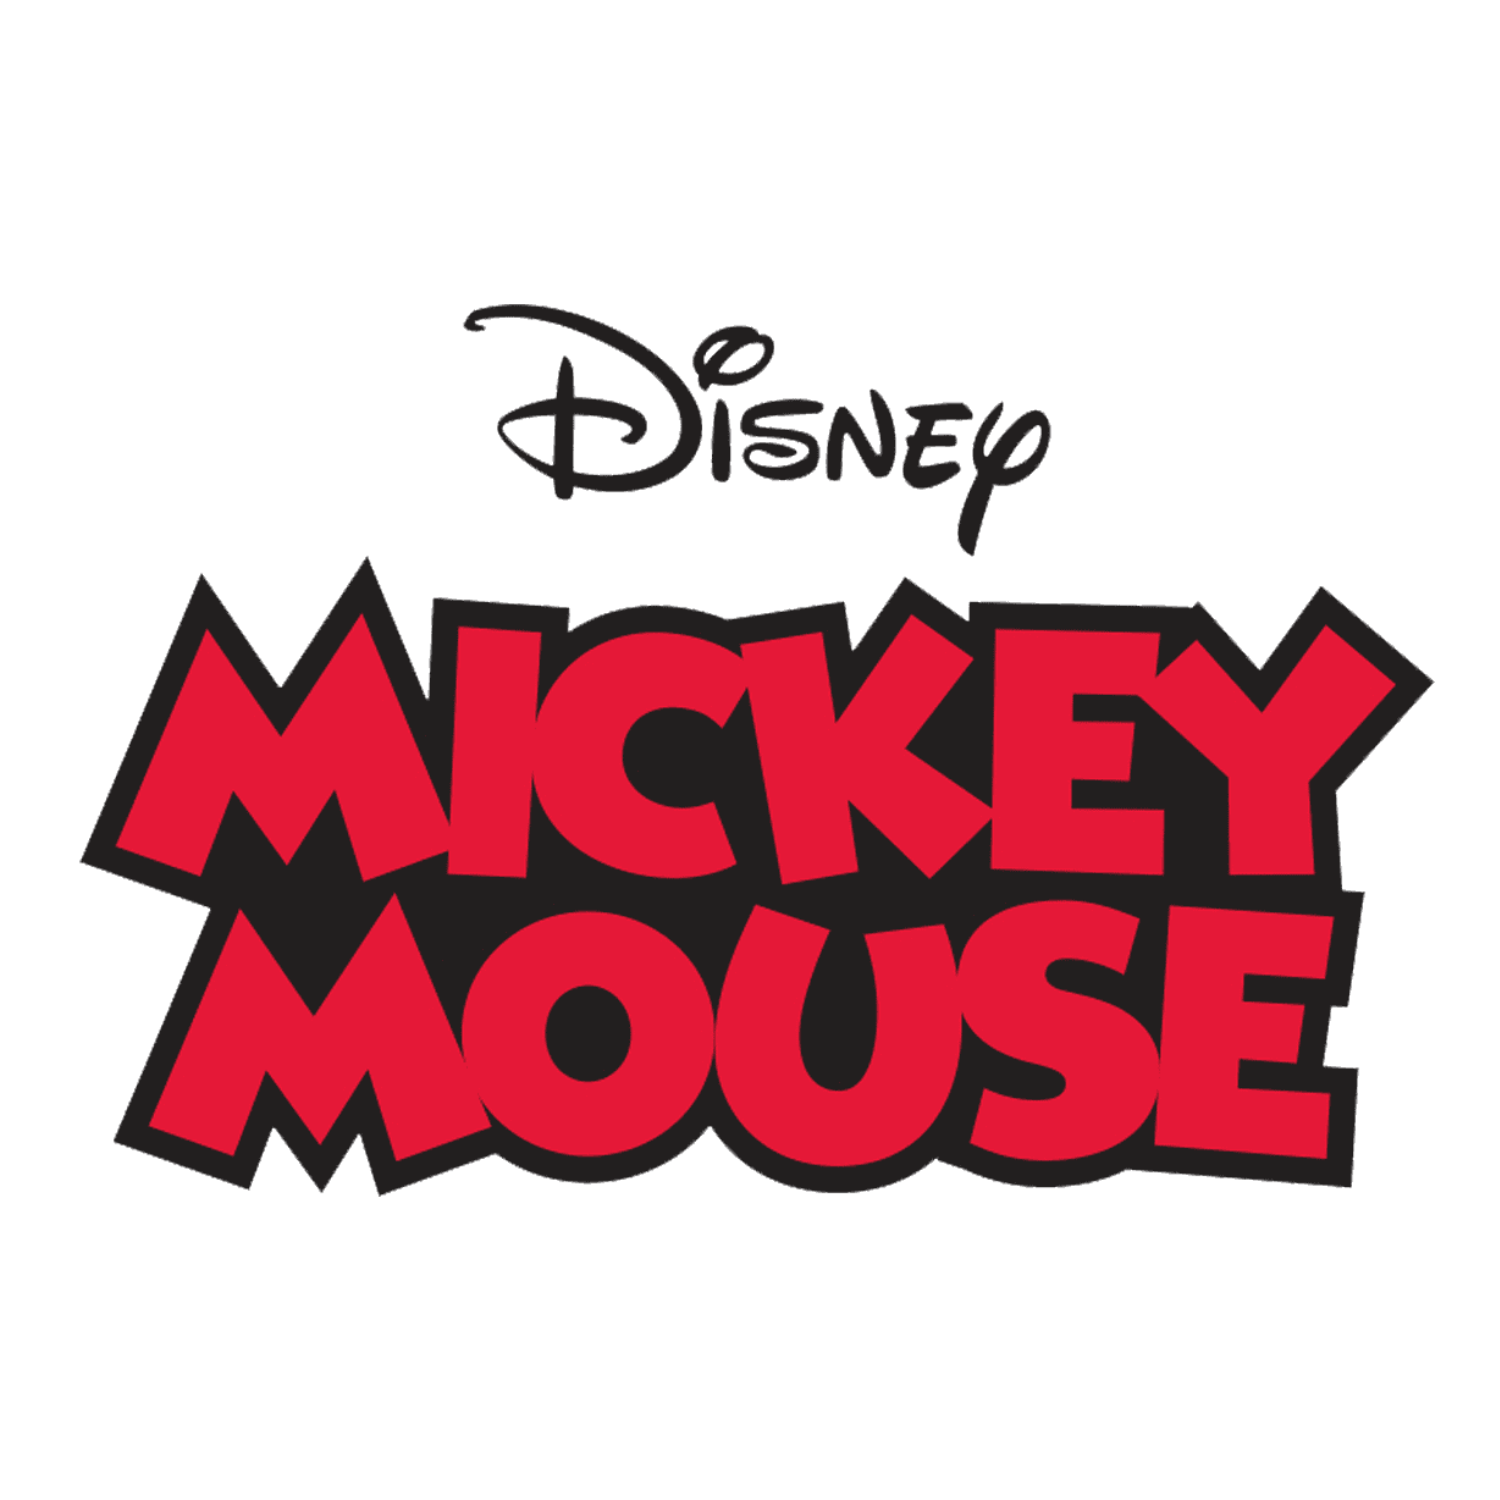 Shop Mickey Mouse products